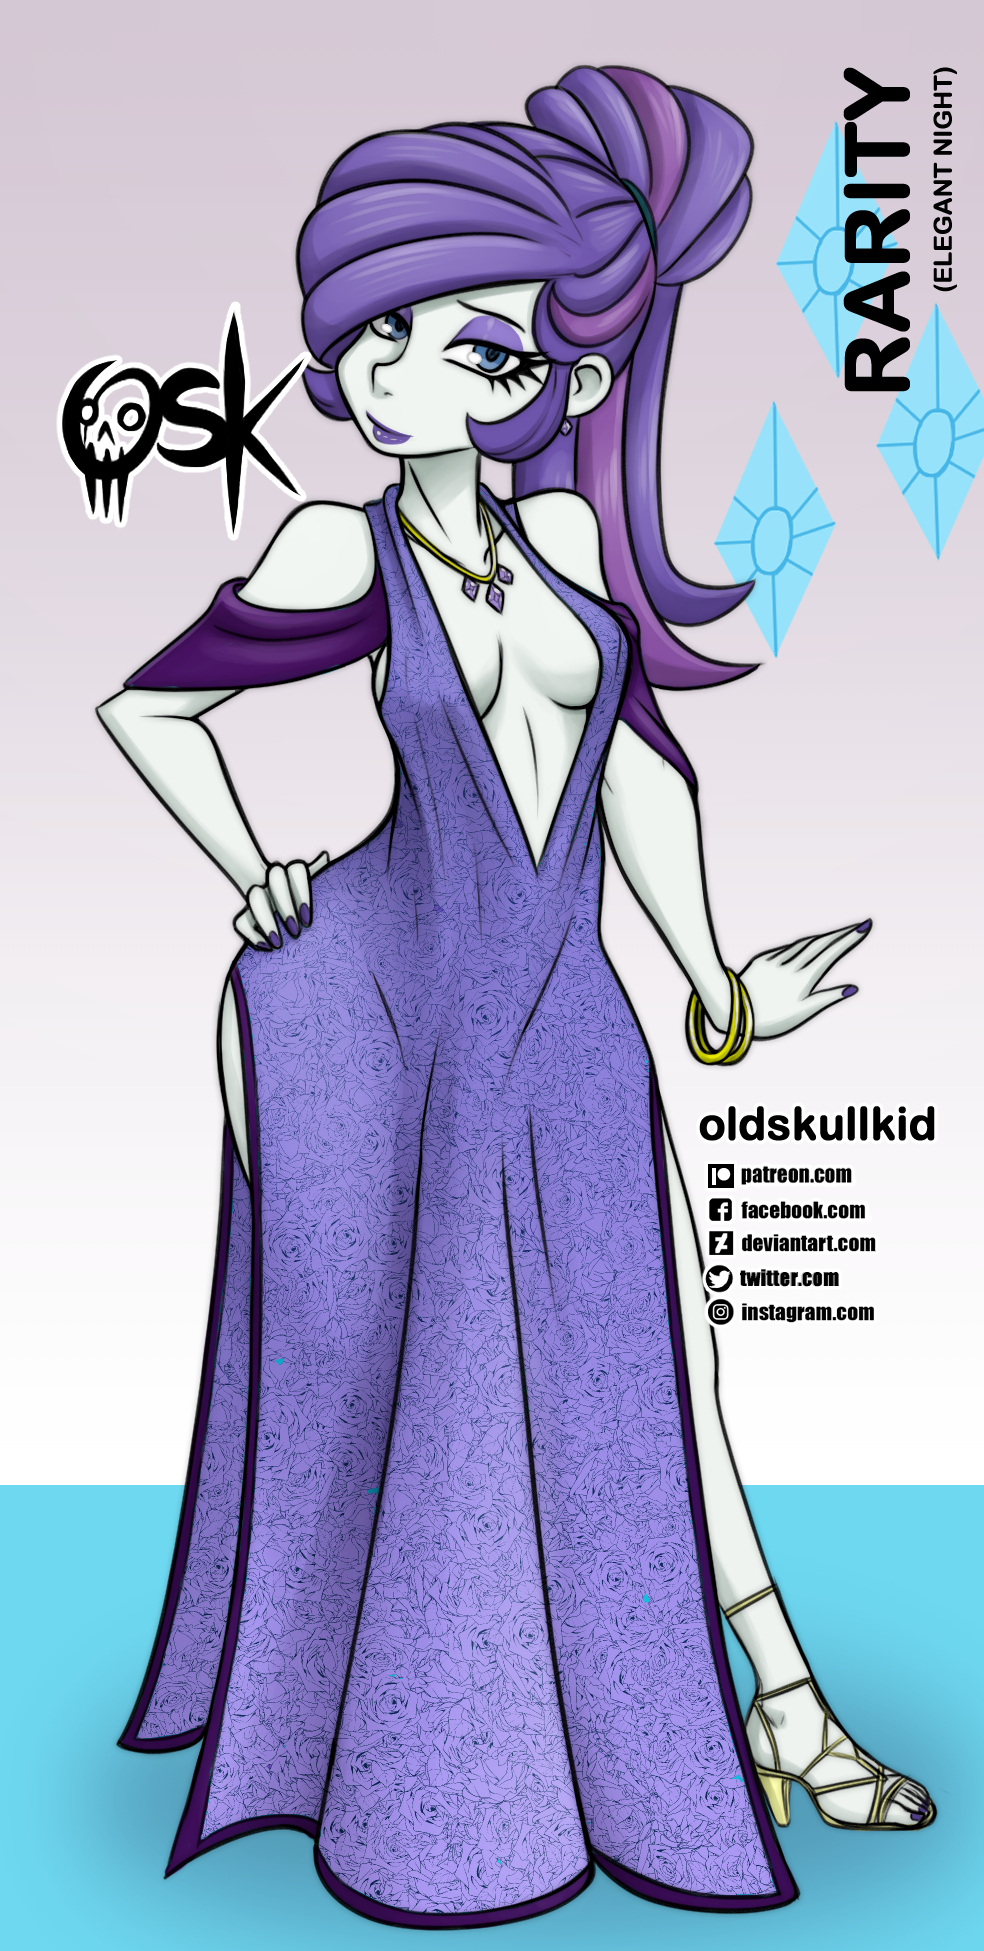 White Nights Metallic and Discontinued Colors by pesim65 on DeviantArt